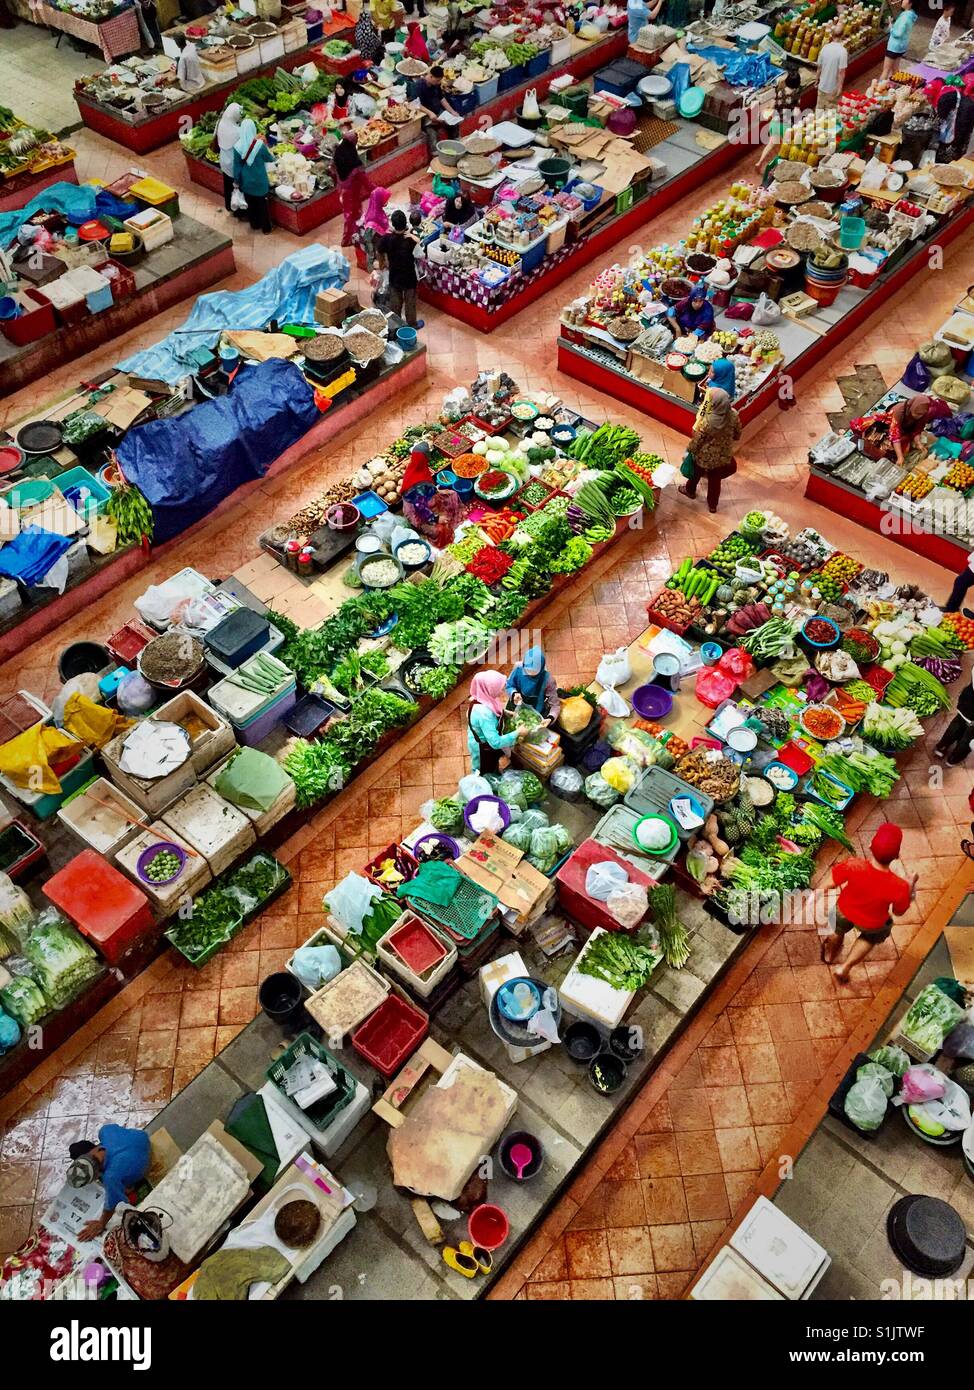 A view of the dry markets called Pasar Besar Siti Khadijah, the famous place among visitors. Stock Photo